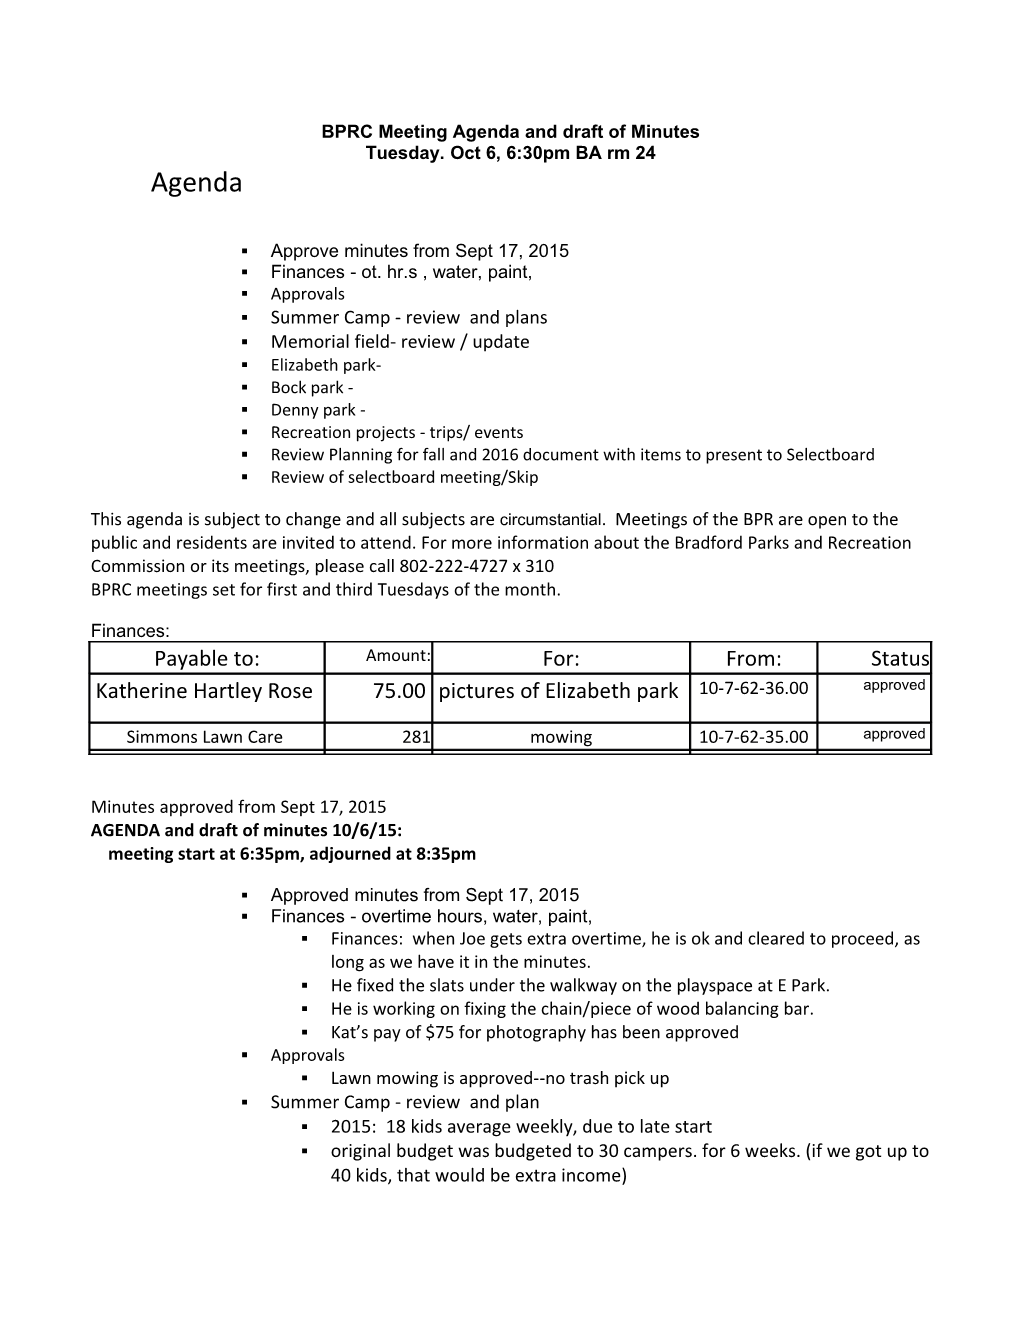 BPRC Meeting Agenda and Draft of Minutes